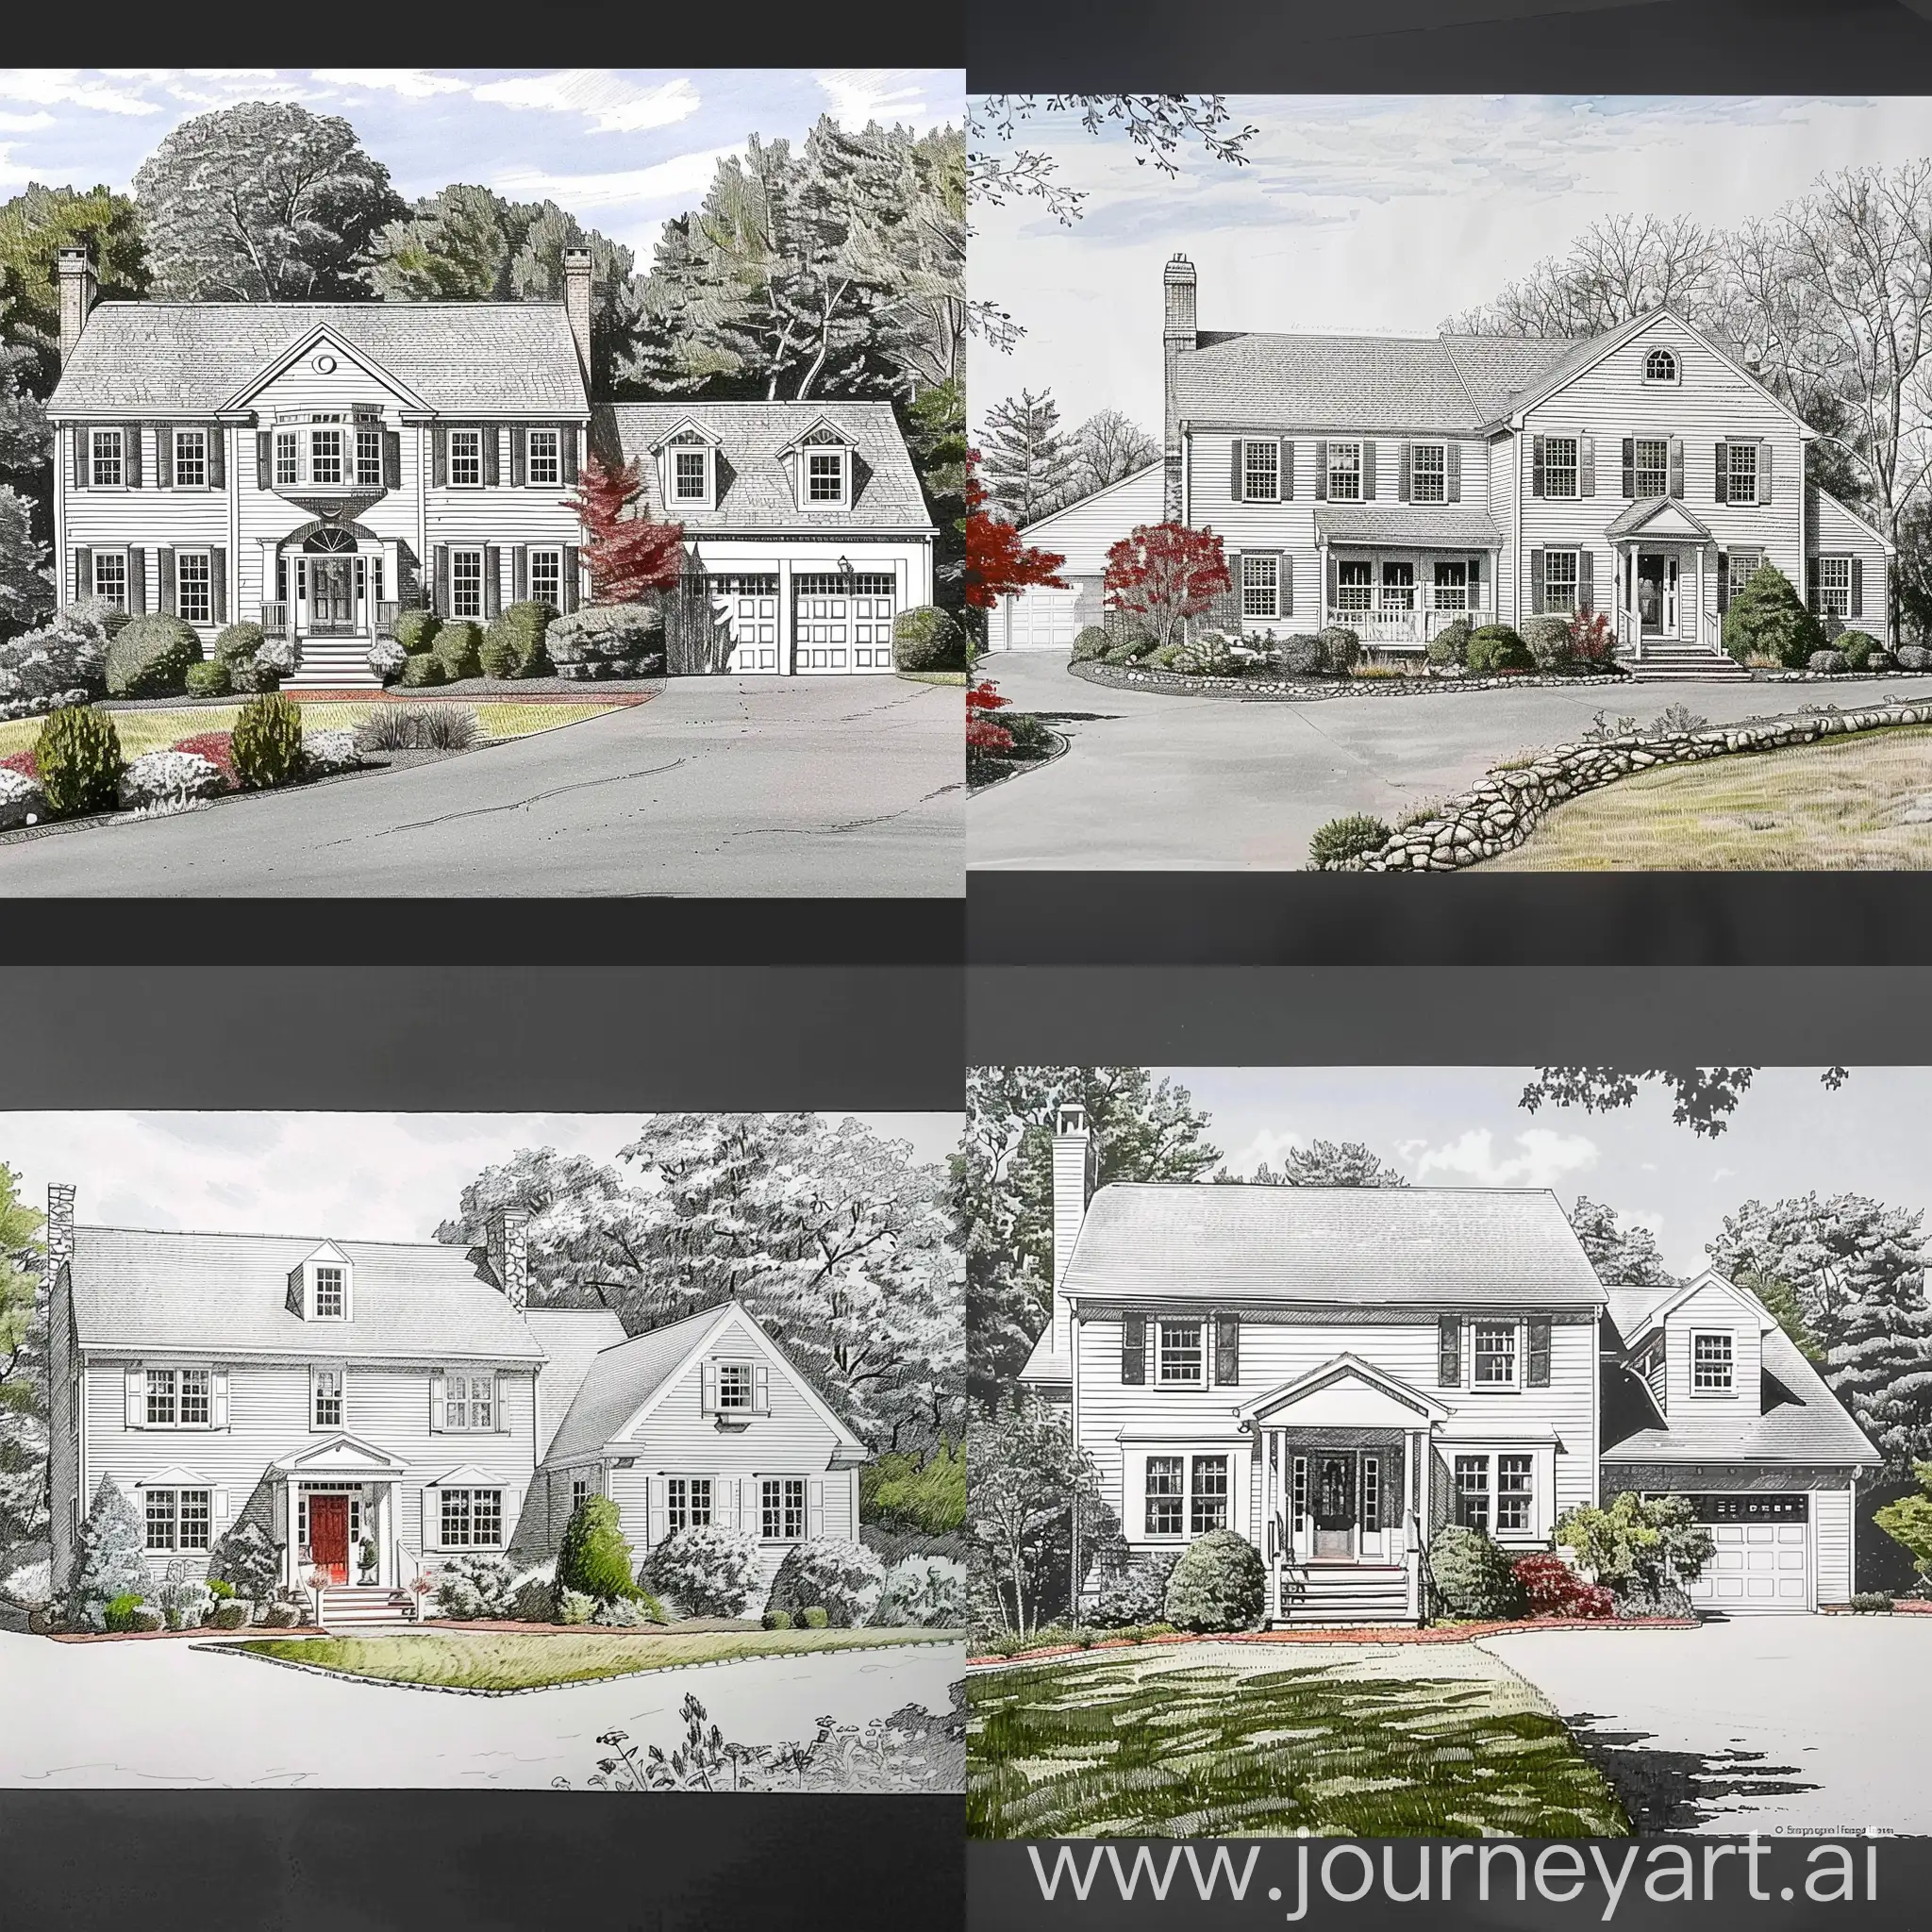 Sketch-of-House-at-28-Country-Lane-Bethany-CT-in-Black-and-White